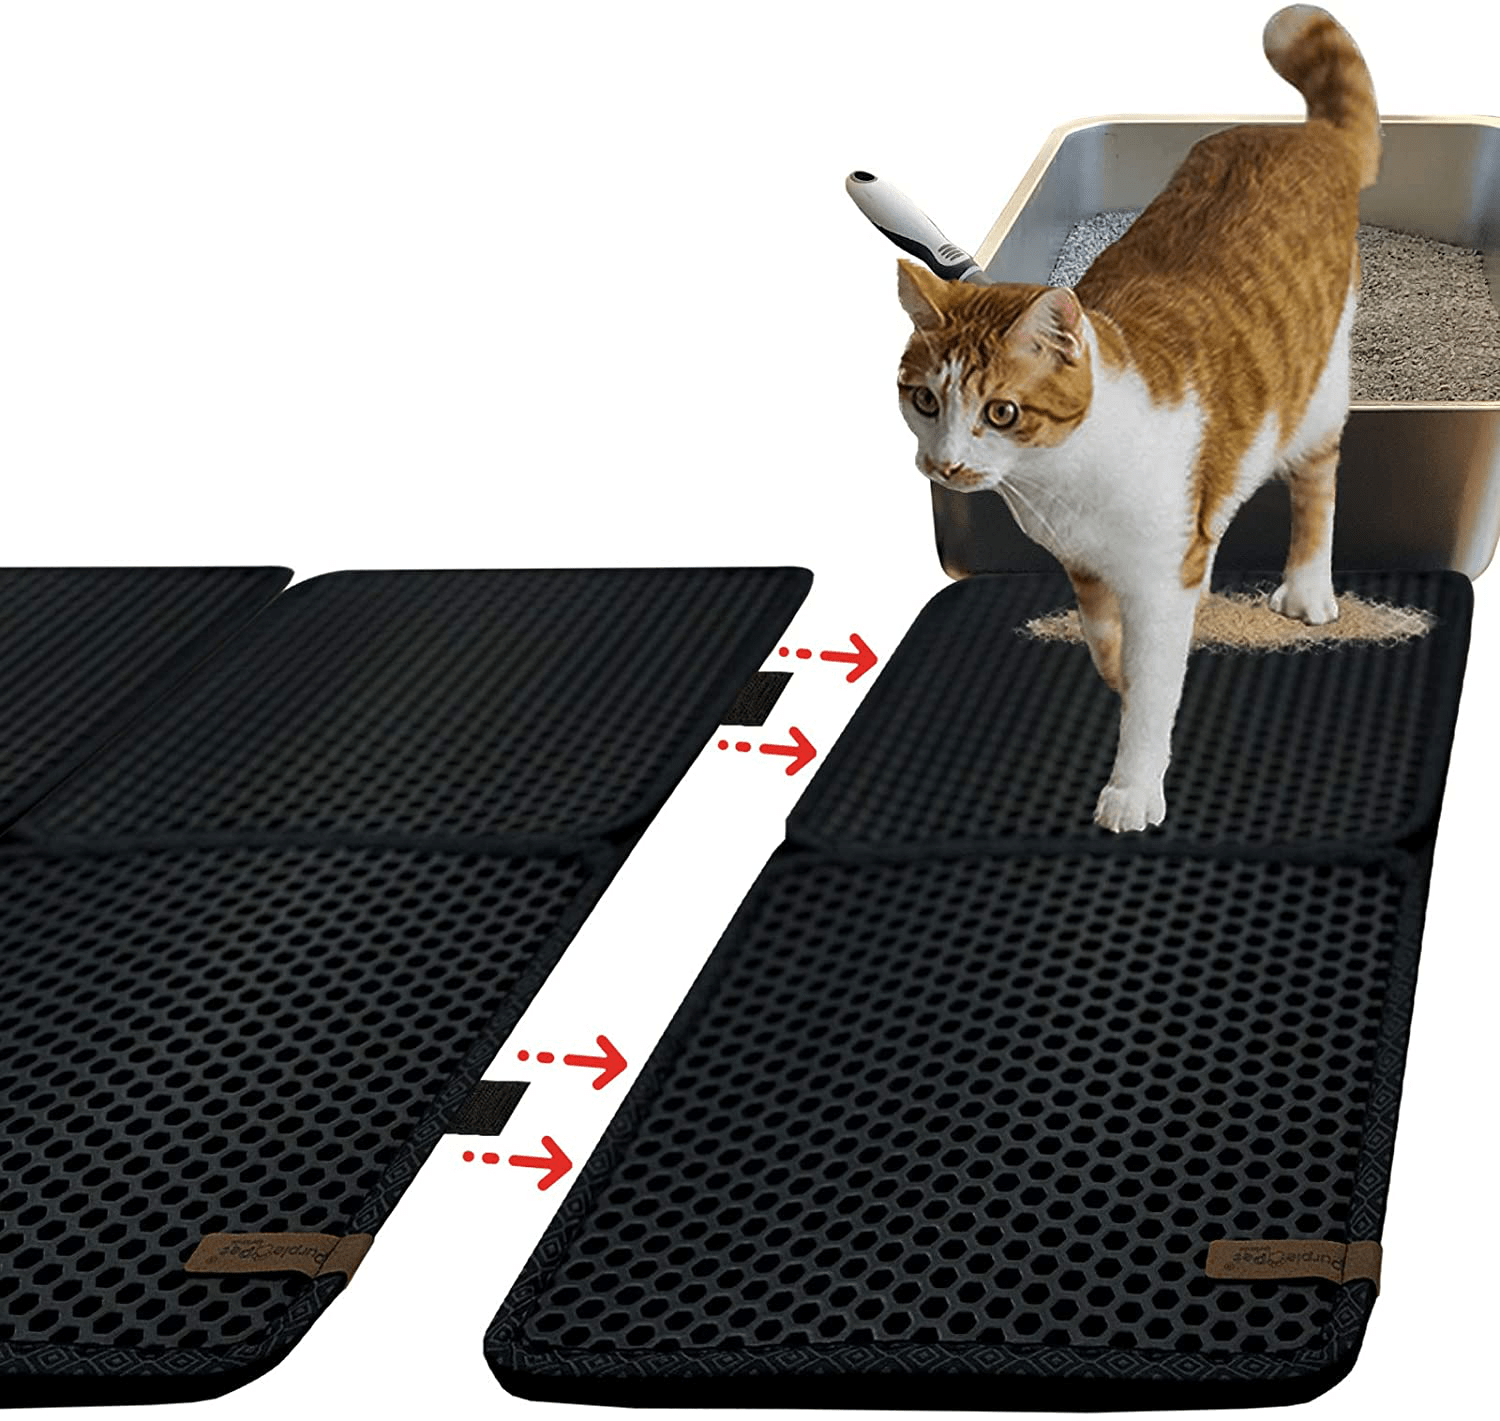 2 Pack Foldable Cat Litter Trapper (27 by 27) Mat Connects with Hook –  KOL PET